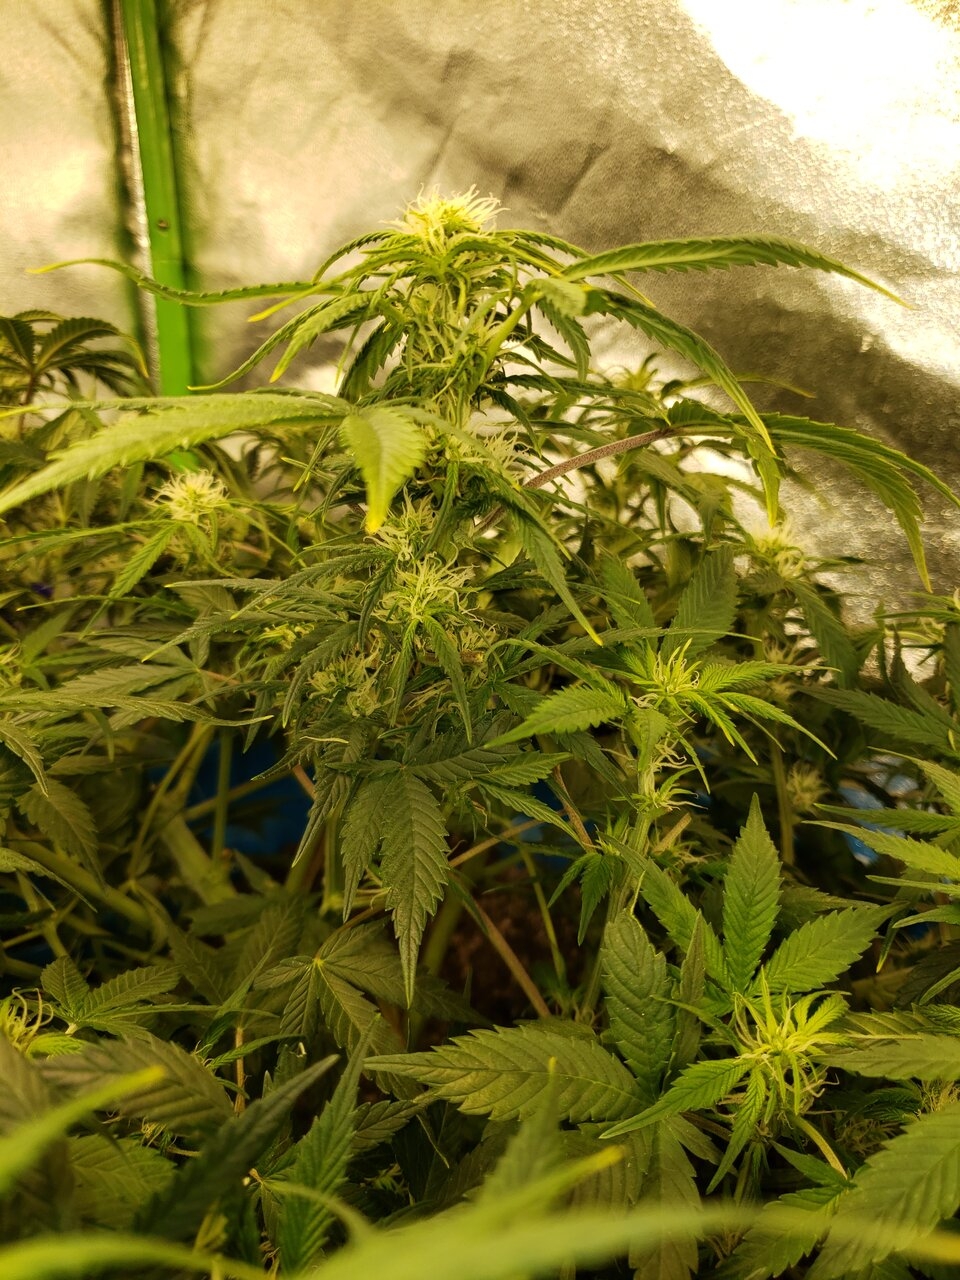 HB Bluedream auto after training